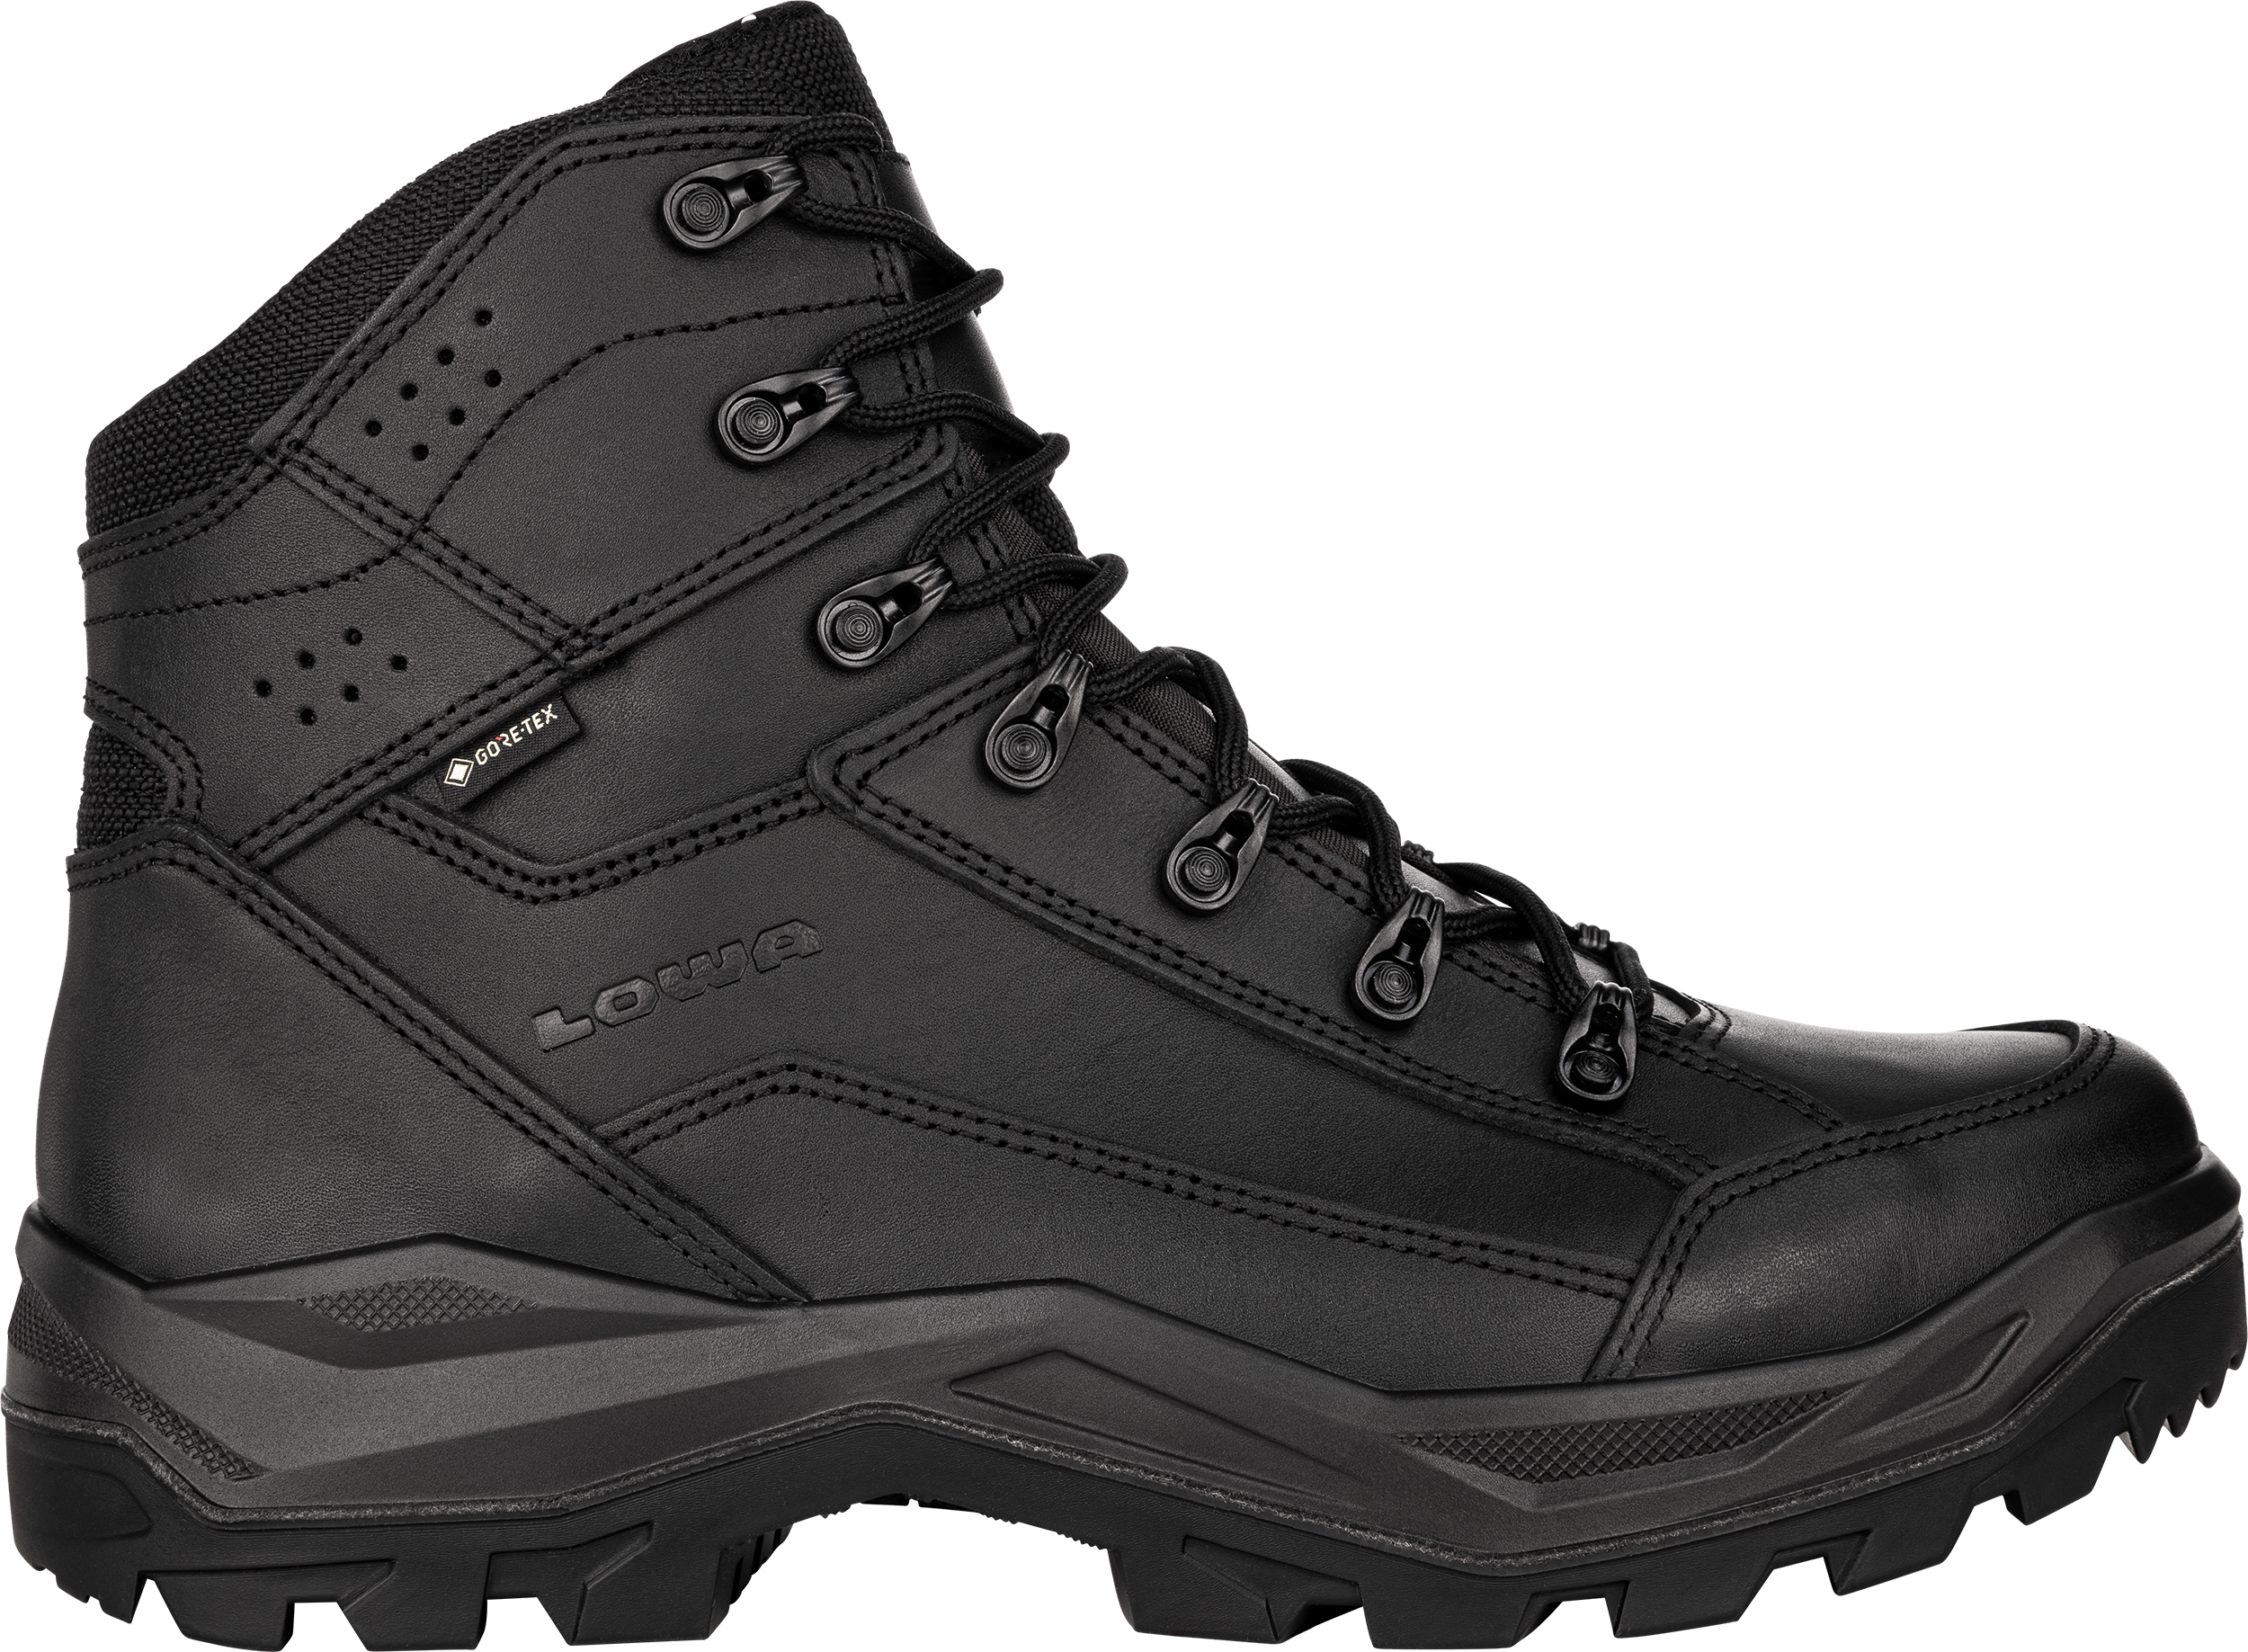 RENEGADE II GTX MID TF MF: TASK FORCE: PATROL Shoes for | LOWA